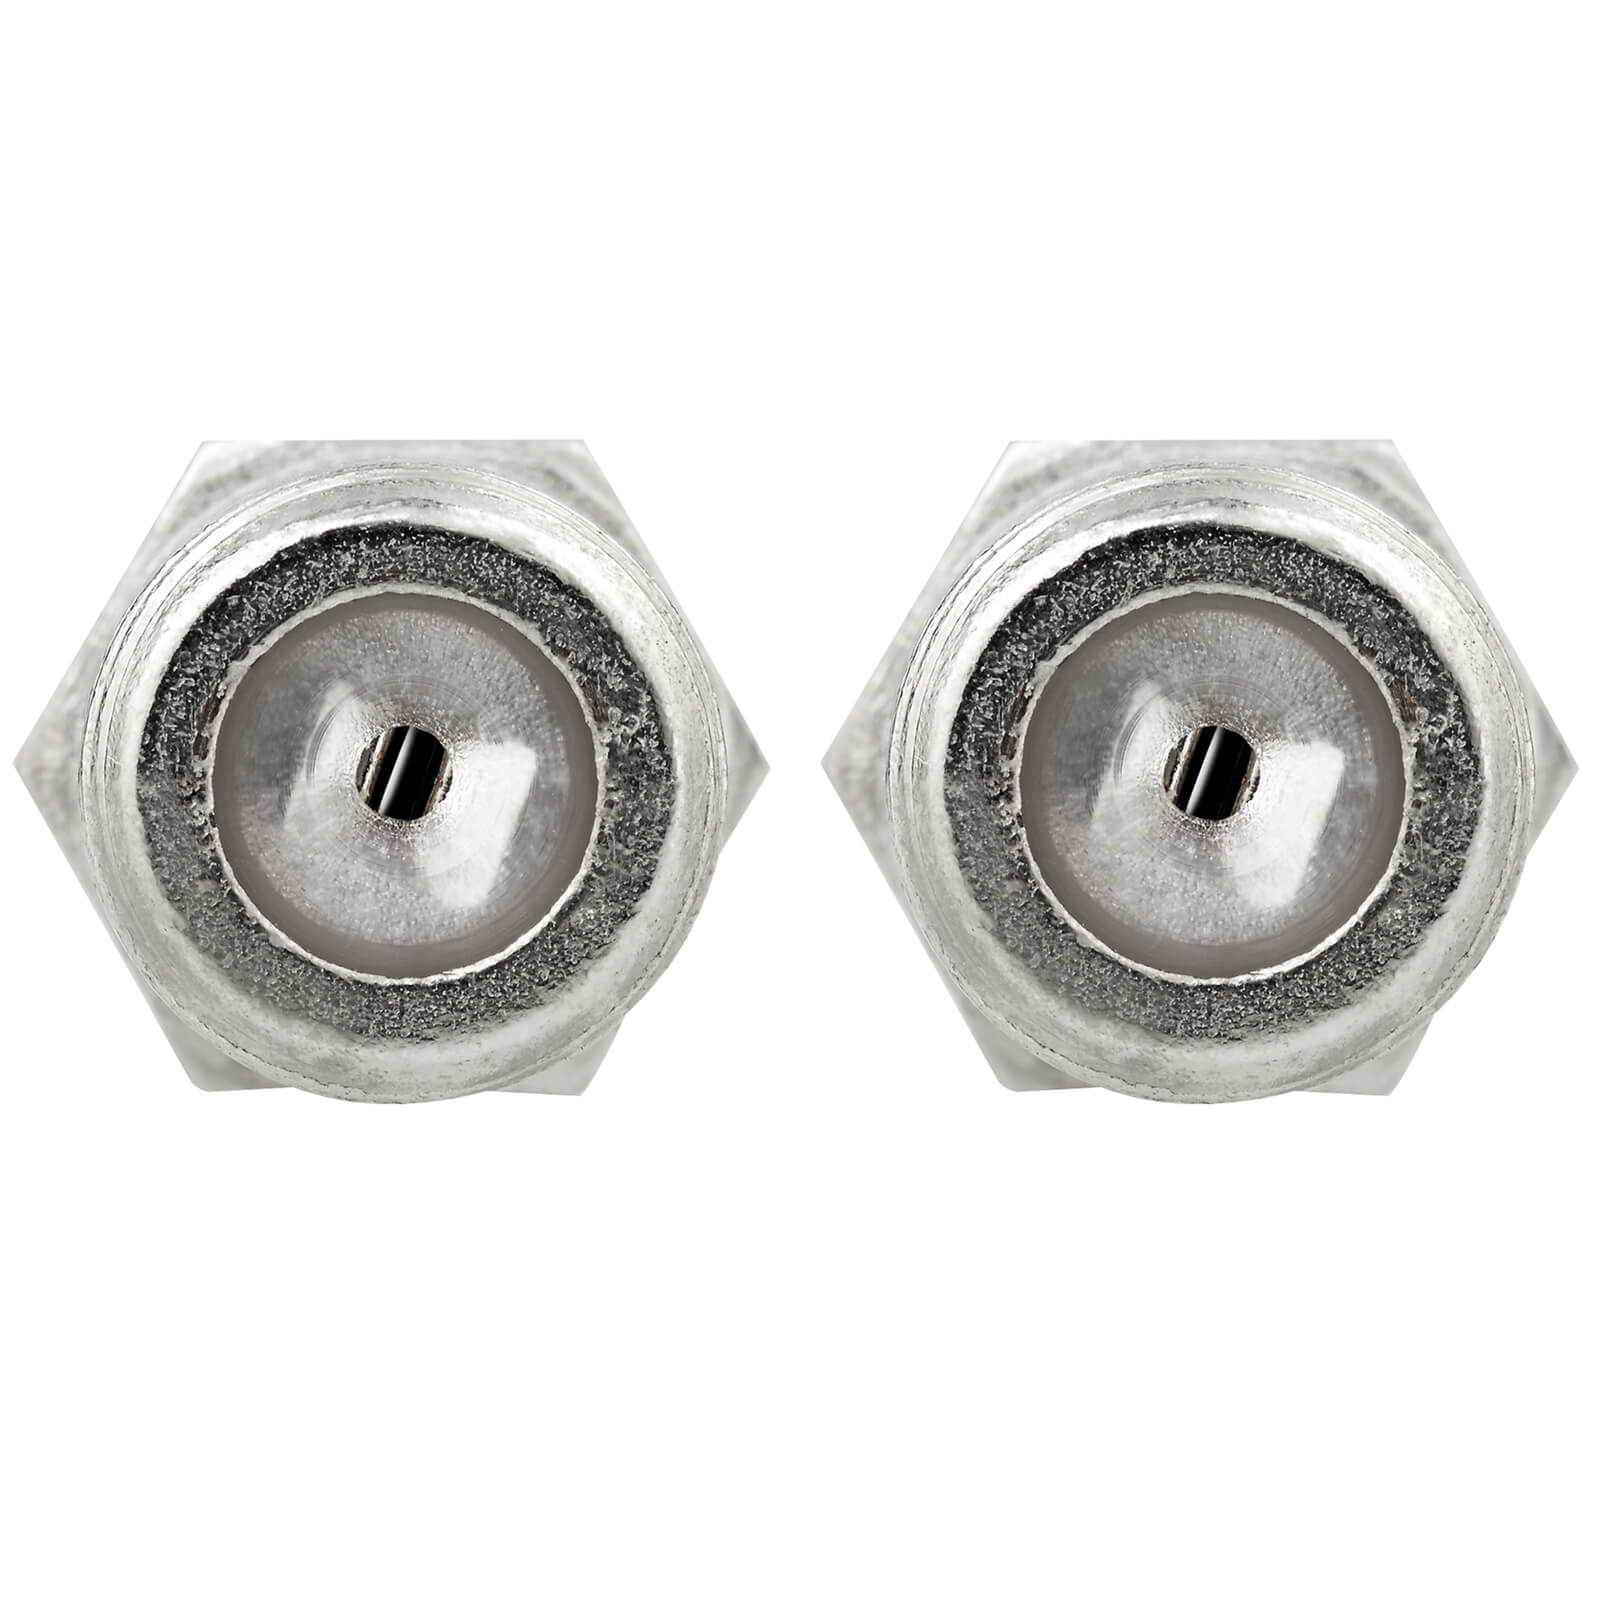 Ross Satellite Cable Couplers Nickel 2 Pack